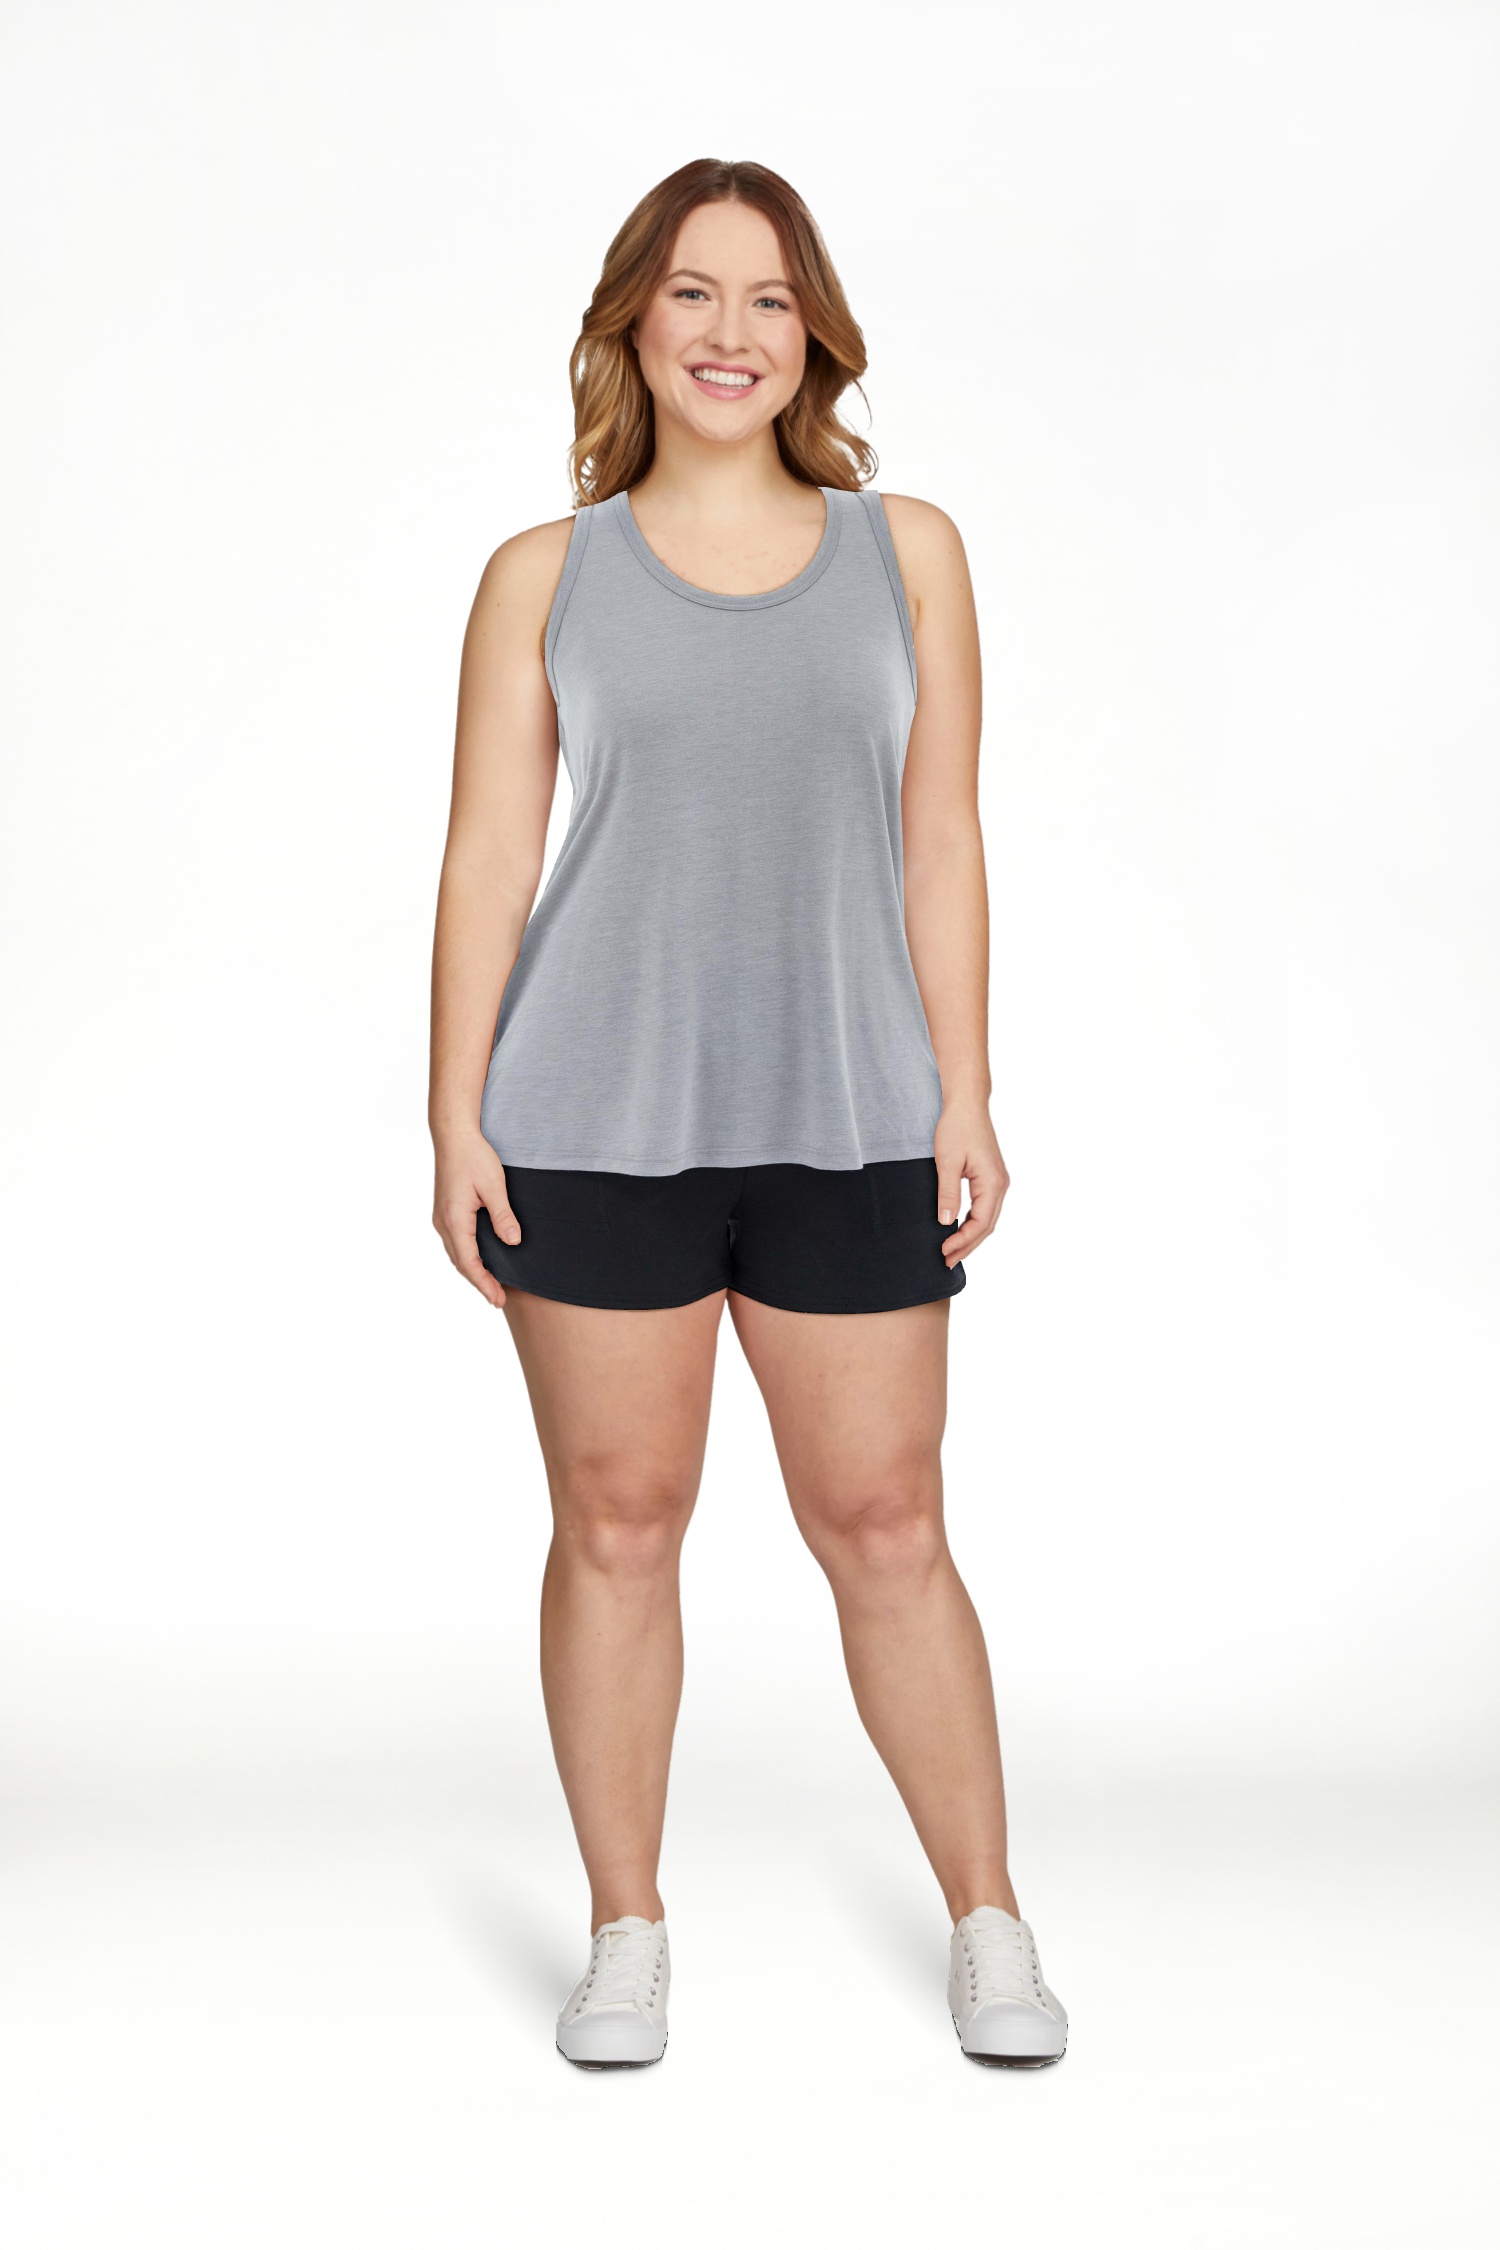 2-Piece Athletic Works Women's Active Tank and Shorts Set (S-XXL) $7 + Free S&H w/ Walmart+ or $35+